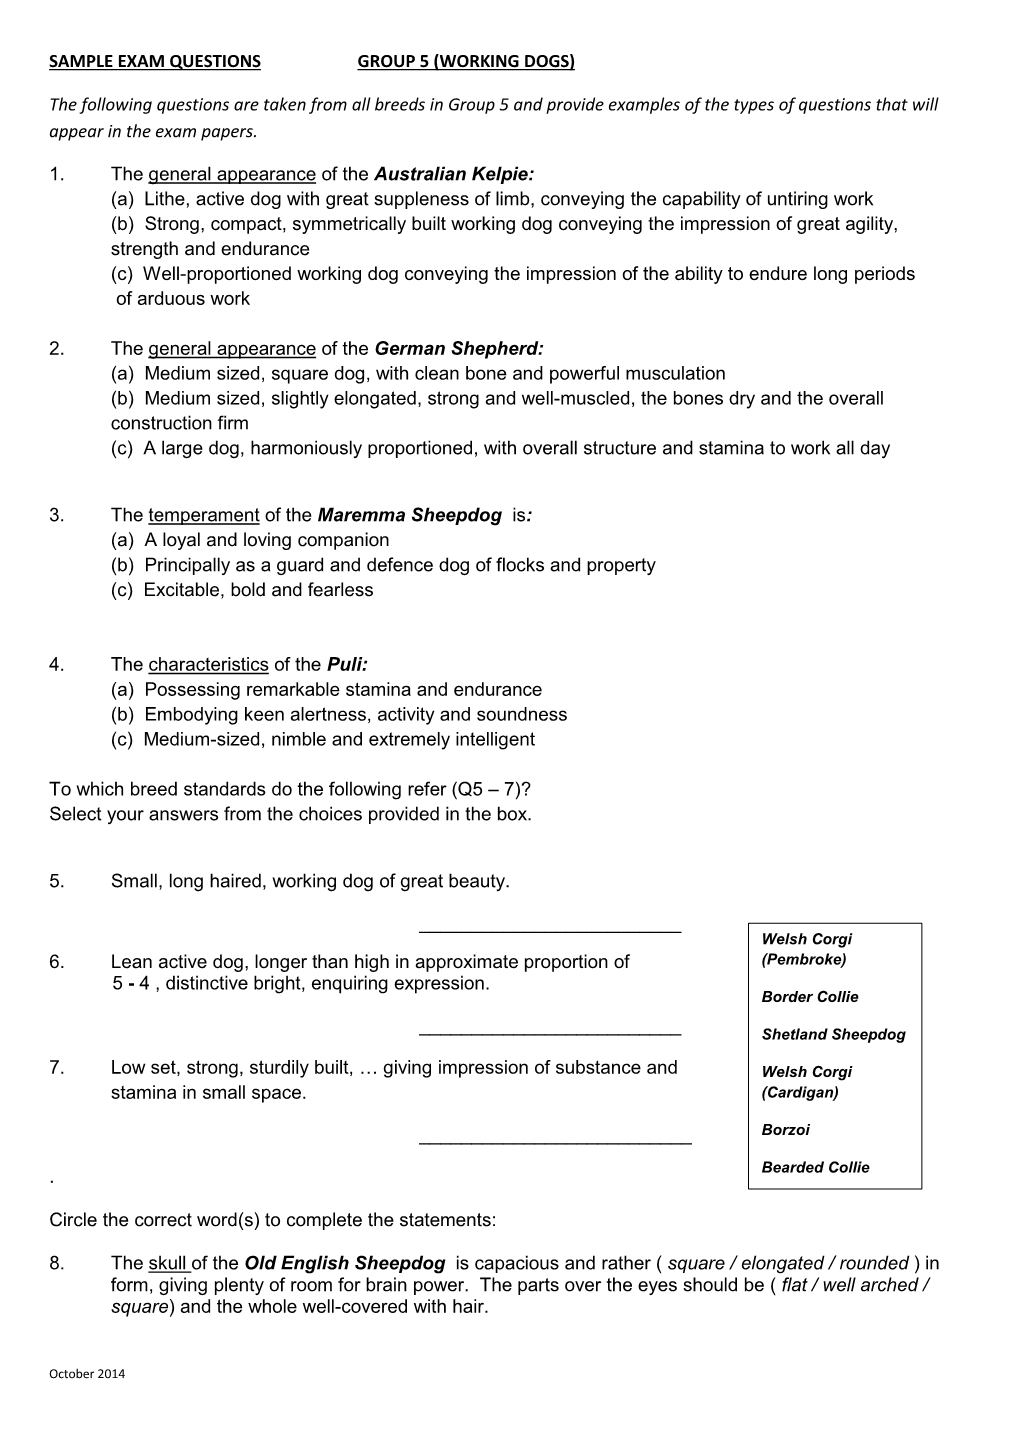 Sample Exam Questions Group 5 (Working Dogs)